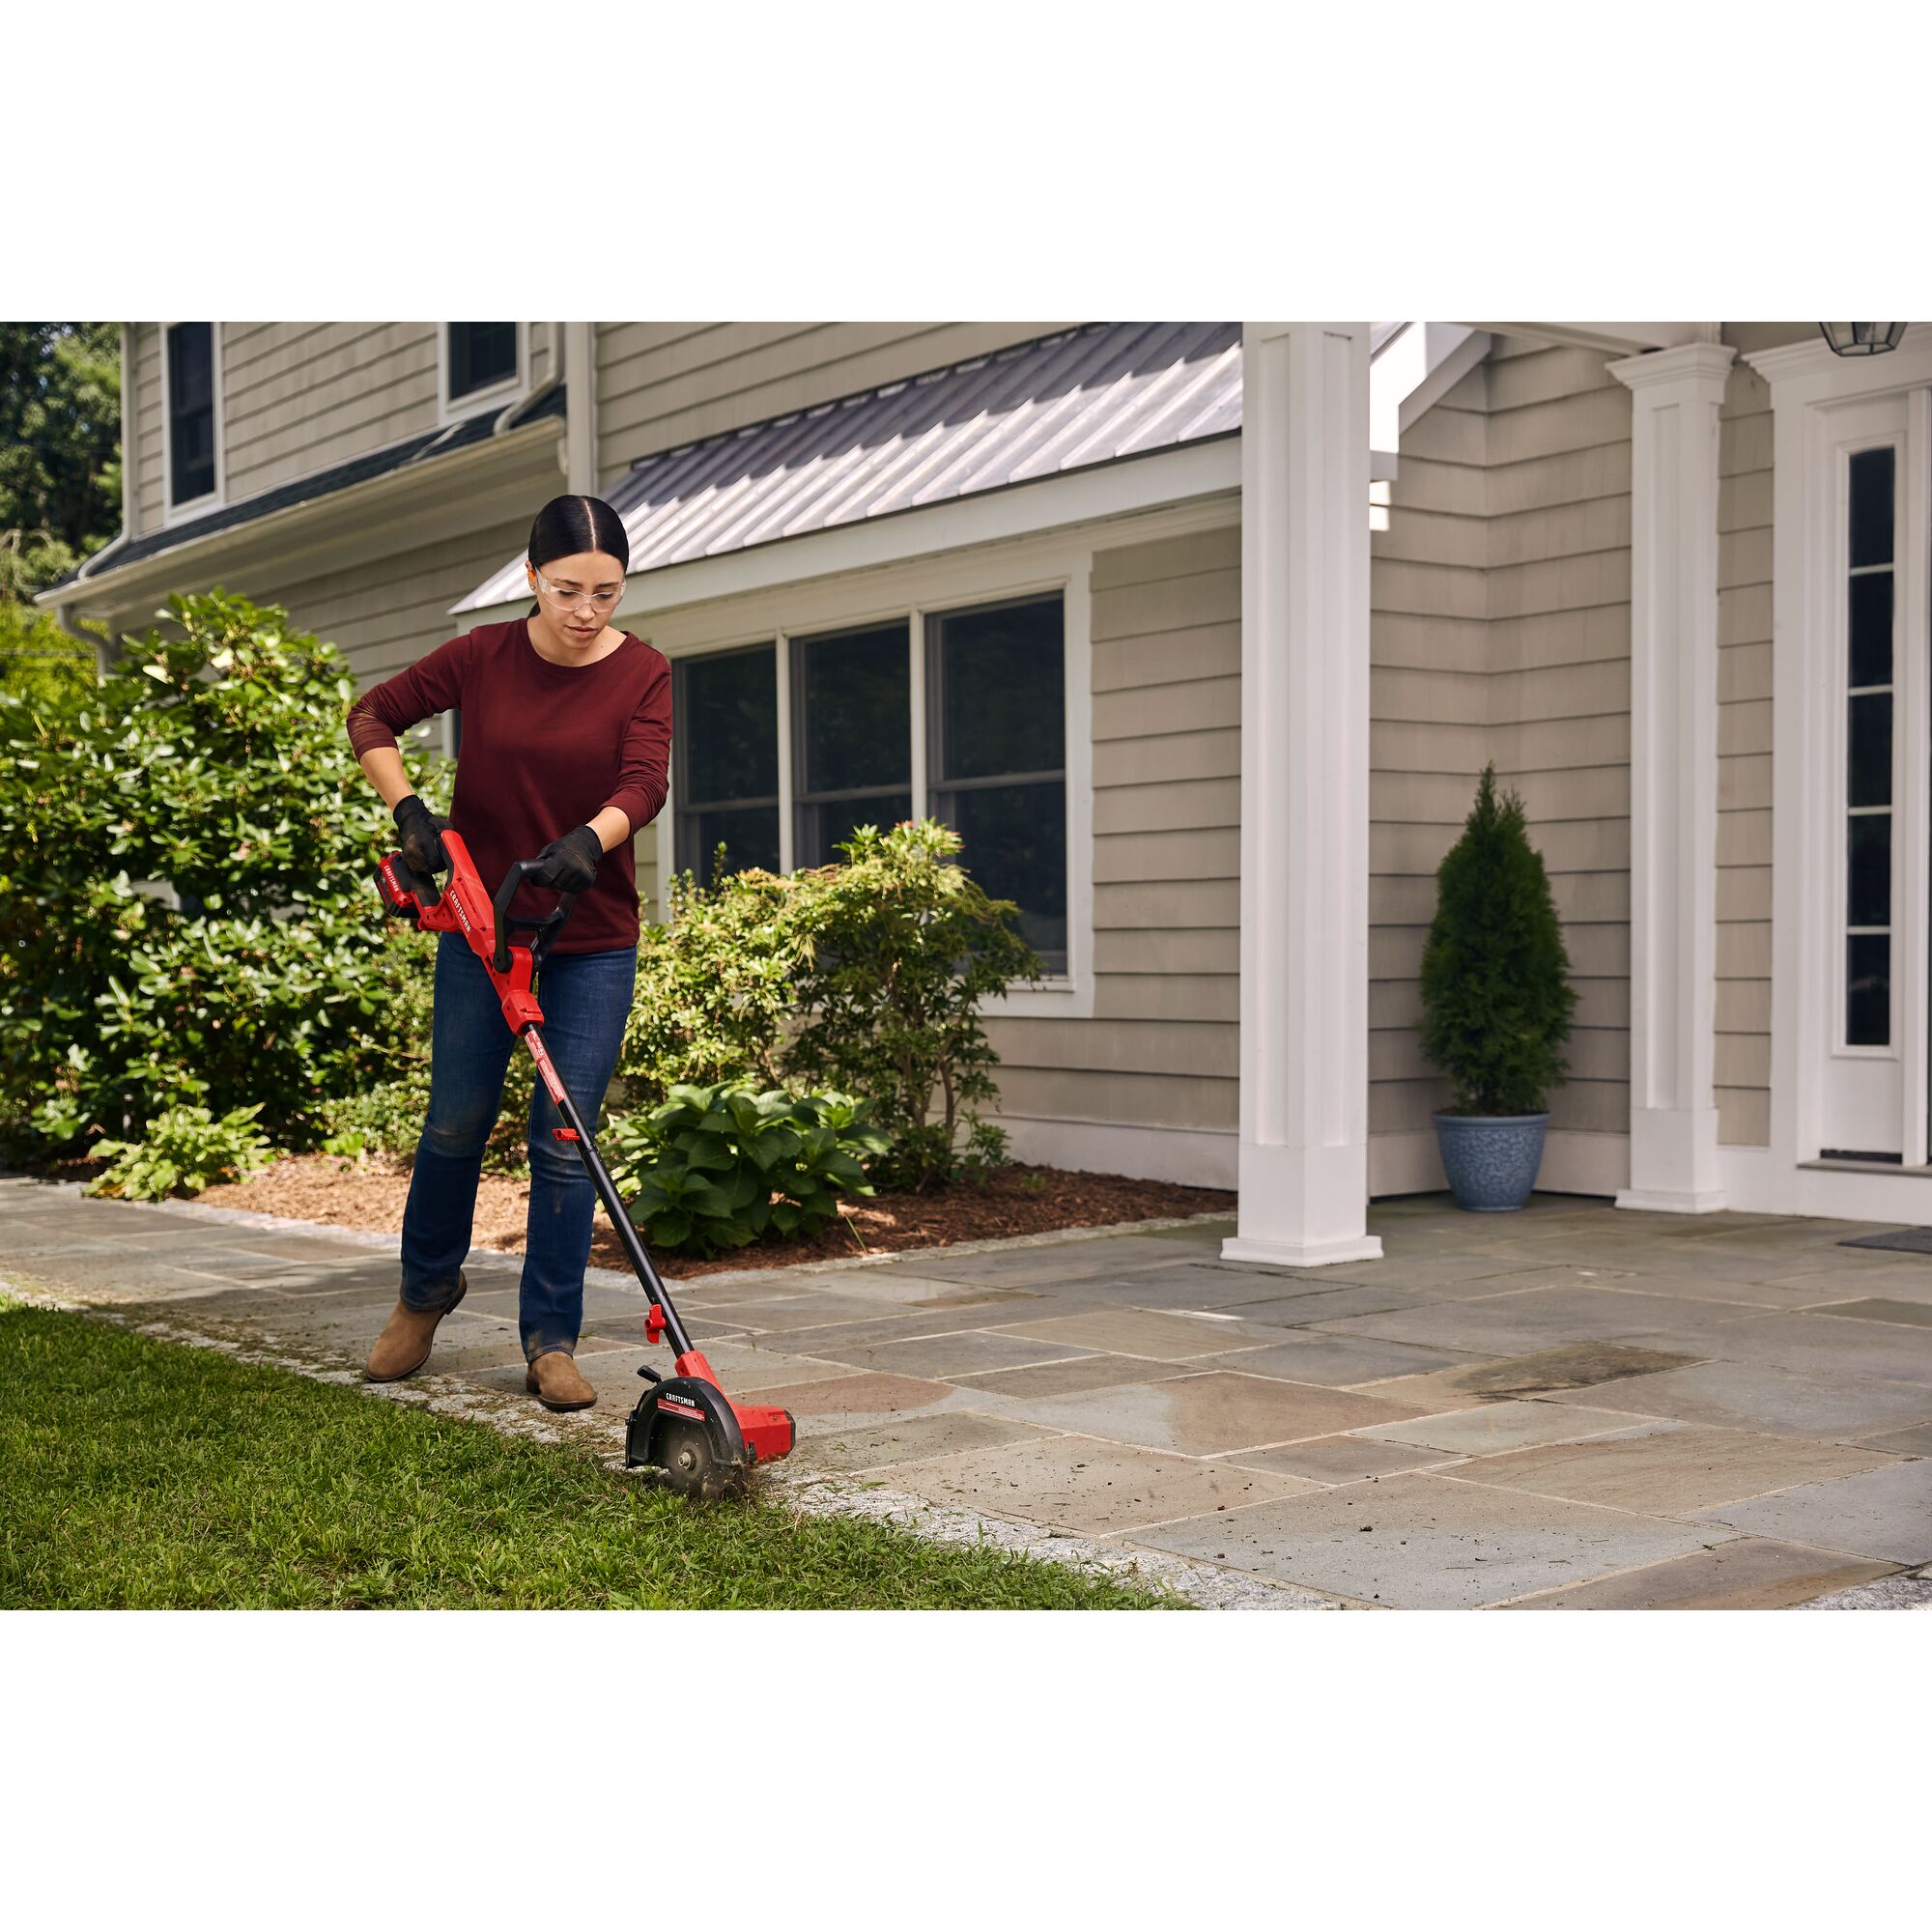 Cordless edger kit being used for edging lawn by person.